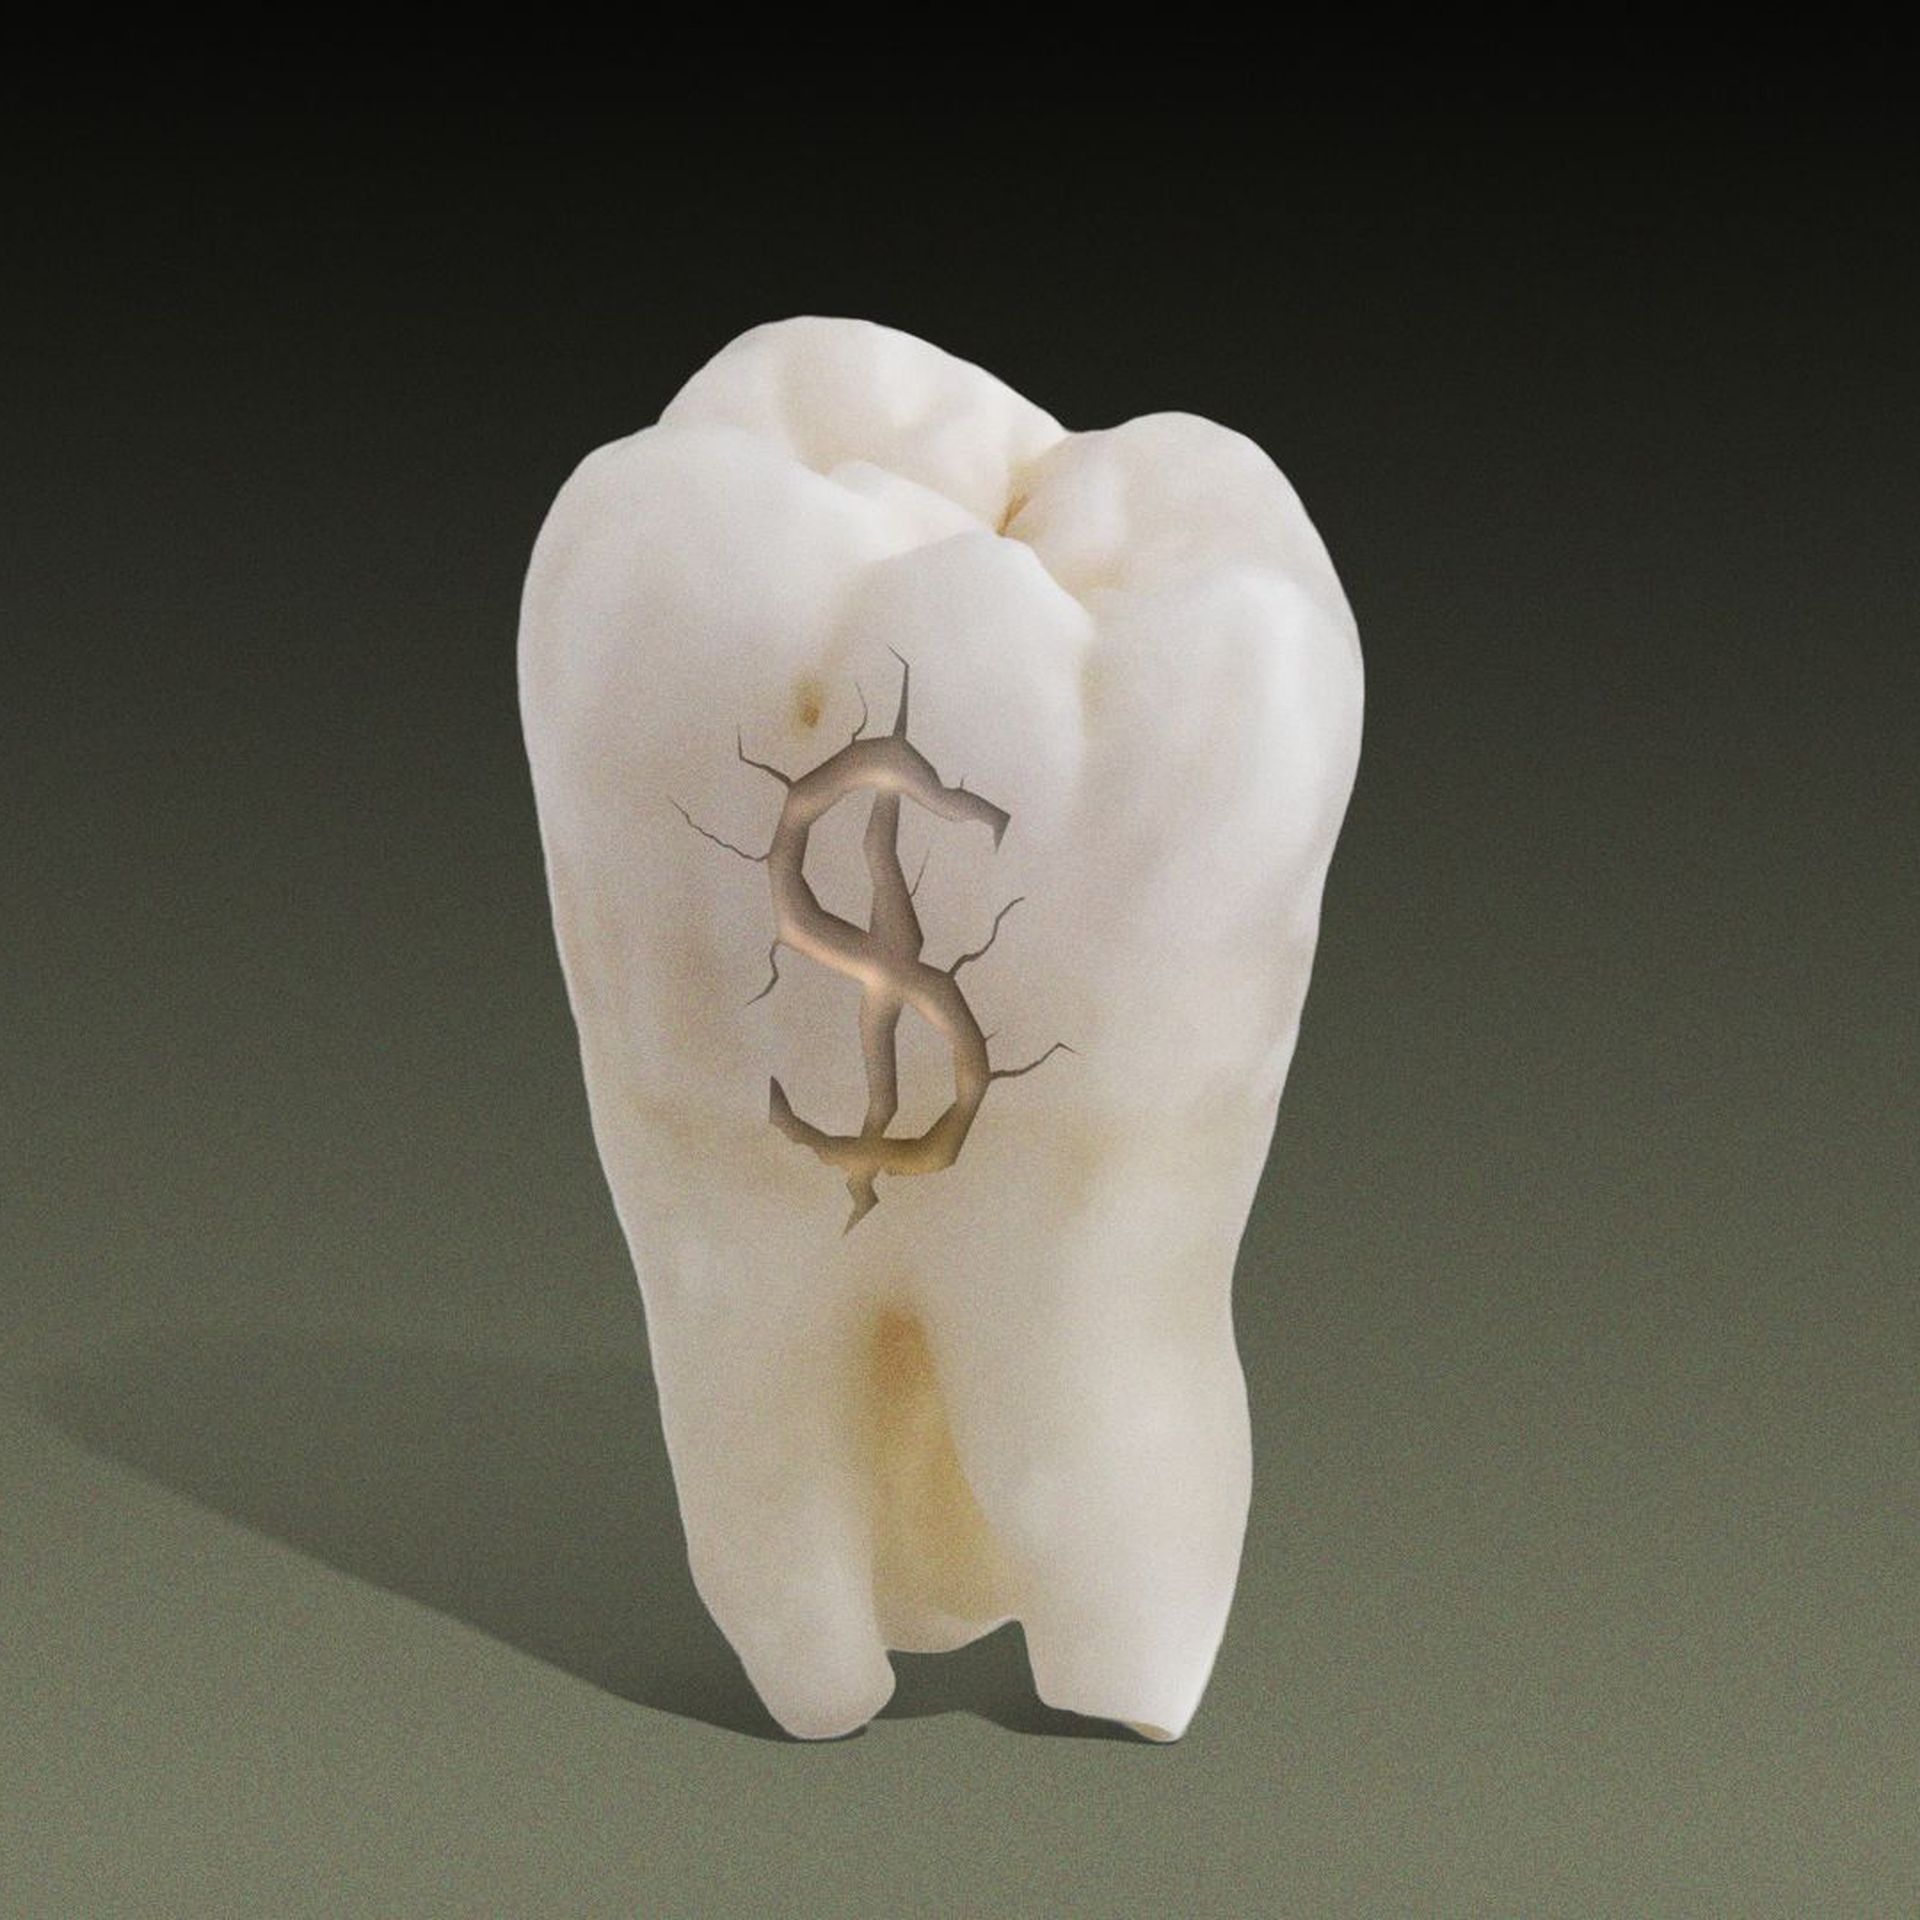 A tooth with a crack shaped like a dollar sign.